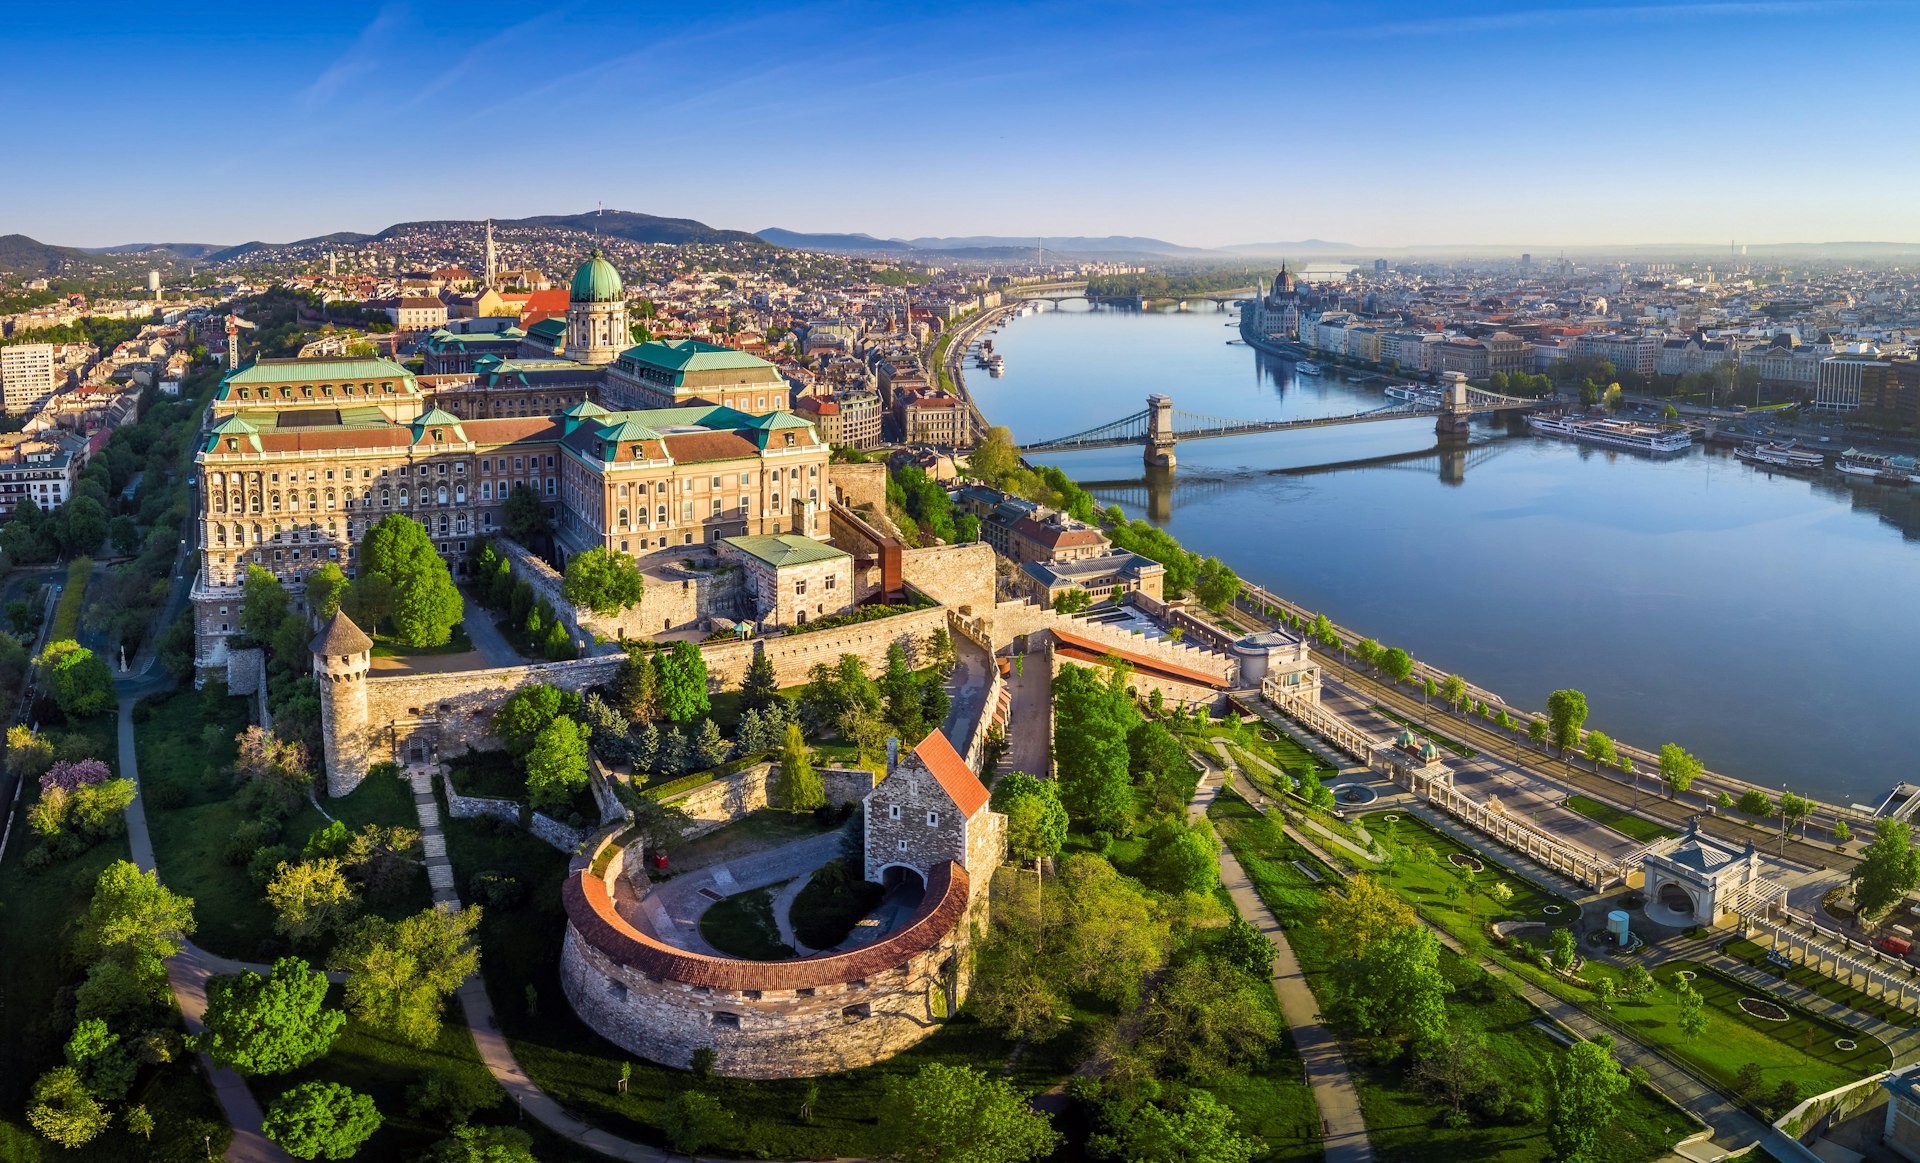 An aerial view of Budapest's Castle District on a sunny day. The old stone buildings are surrounded by pockets of greenery.